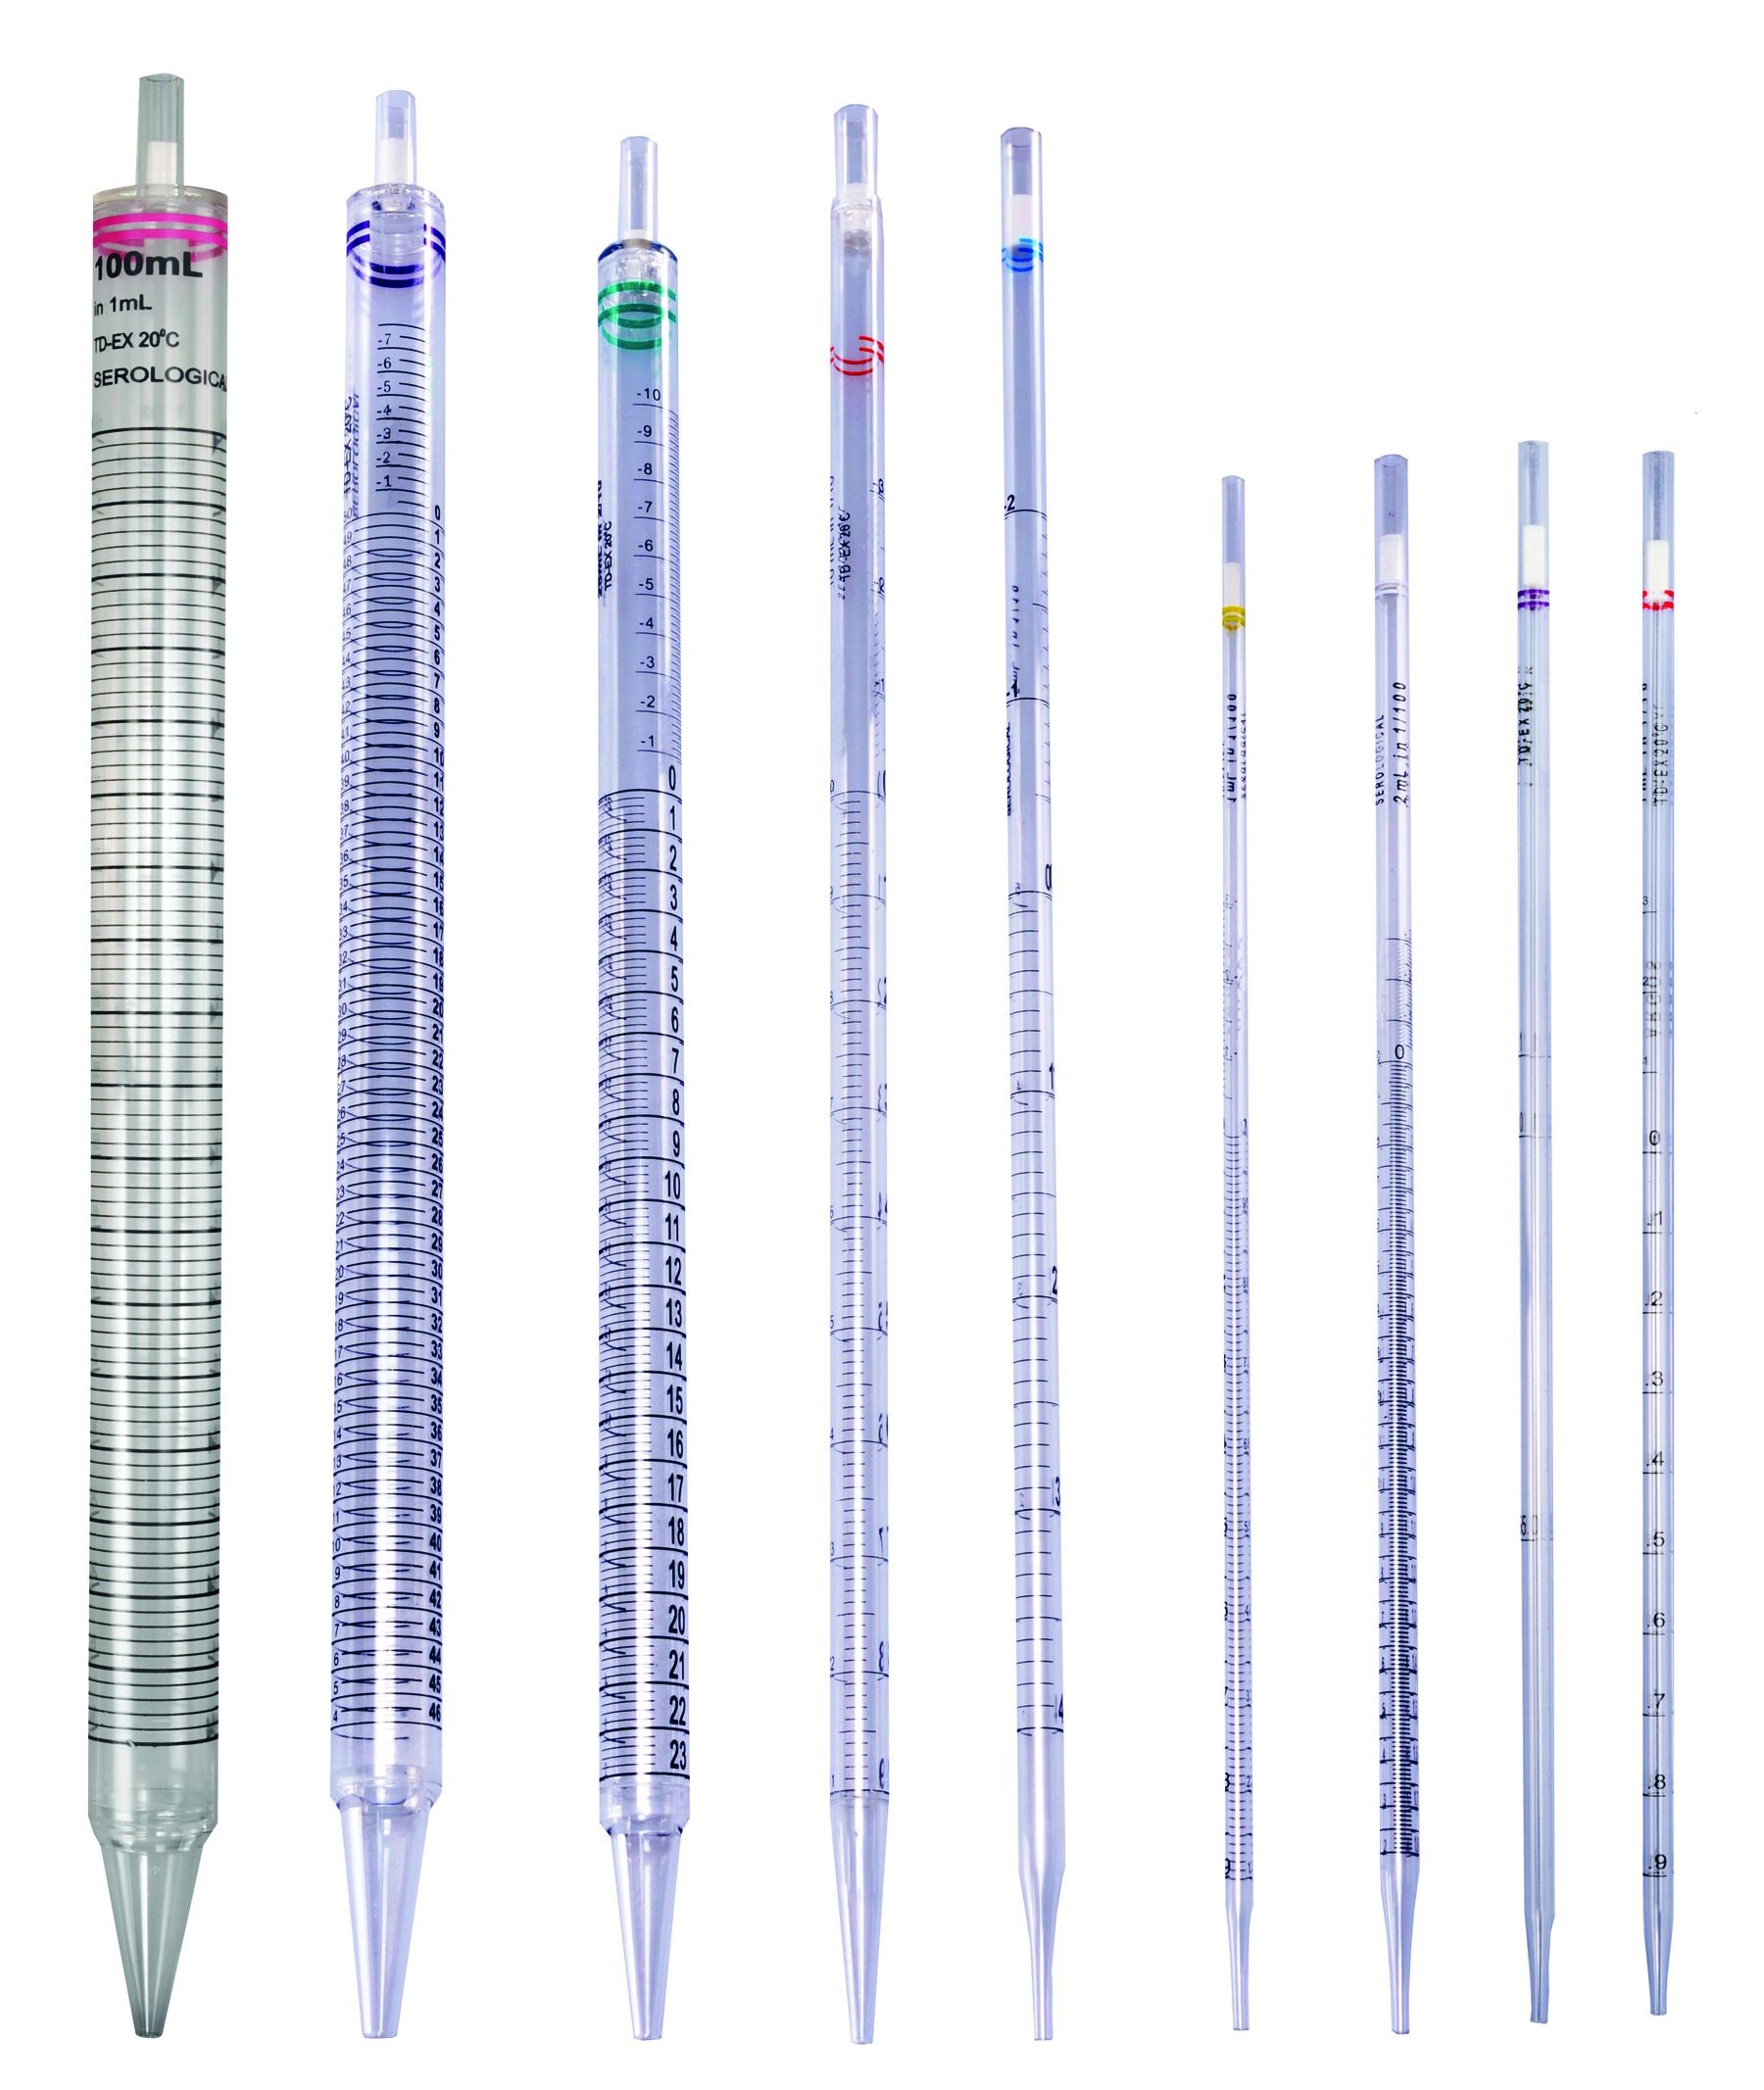 Green Striped Standard Tip 2mL Capacity Adamas-Beta Serological Pipette Individually Wrapped Sterile Case of 100 